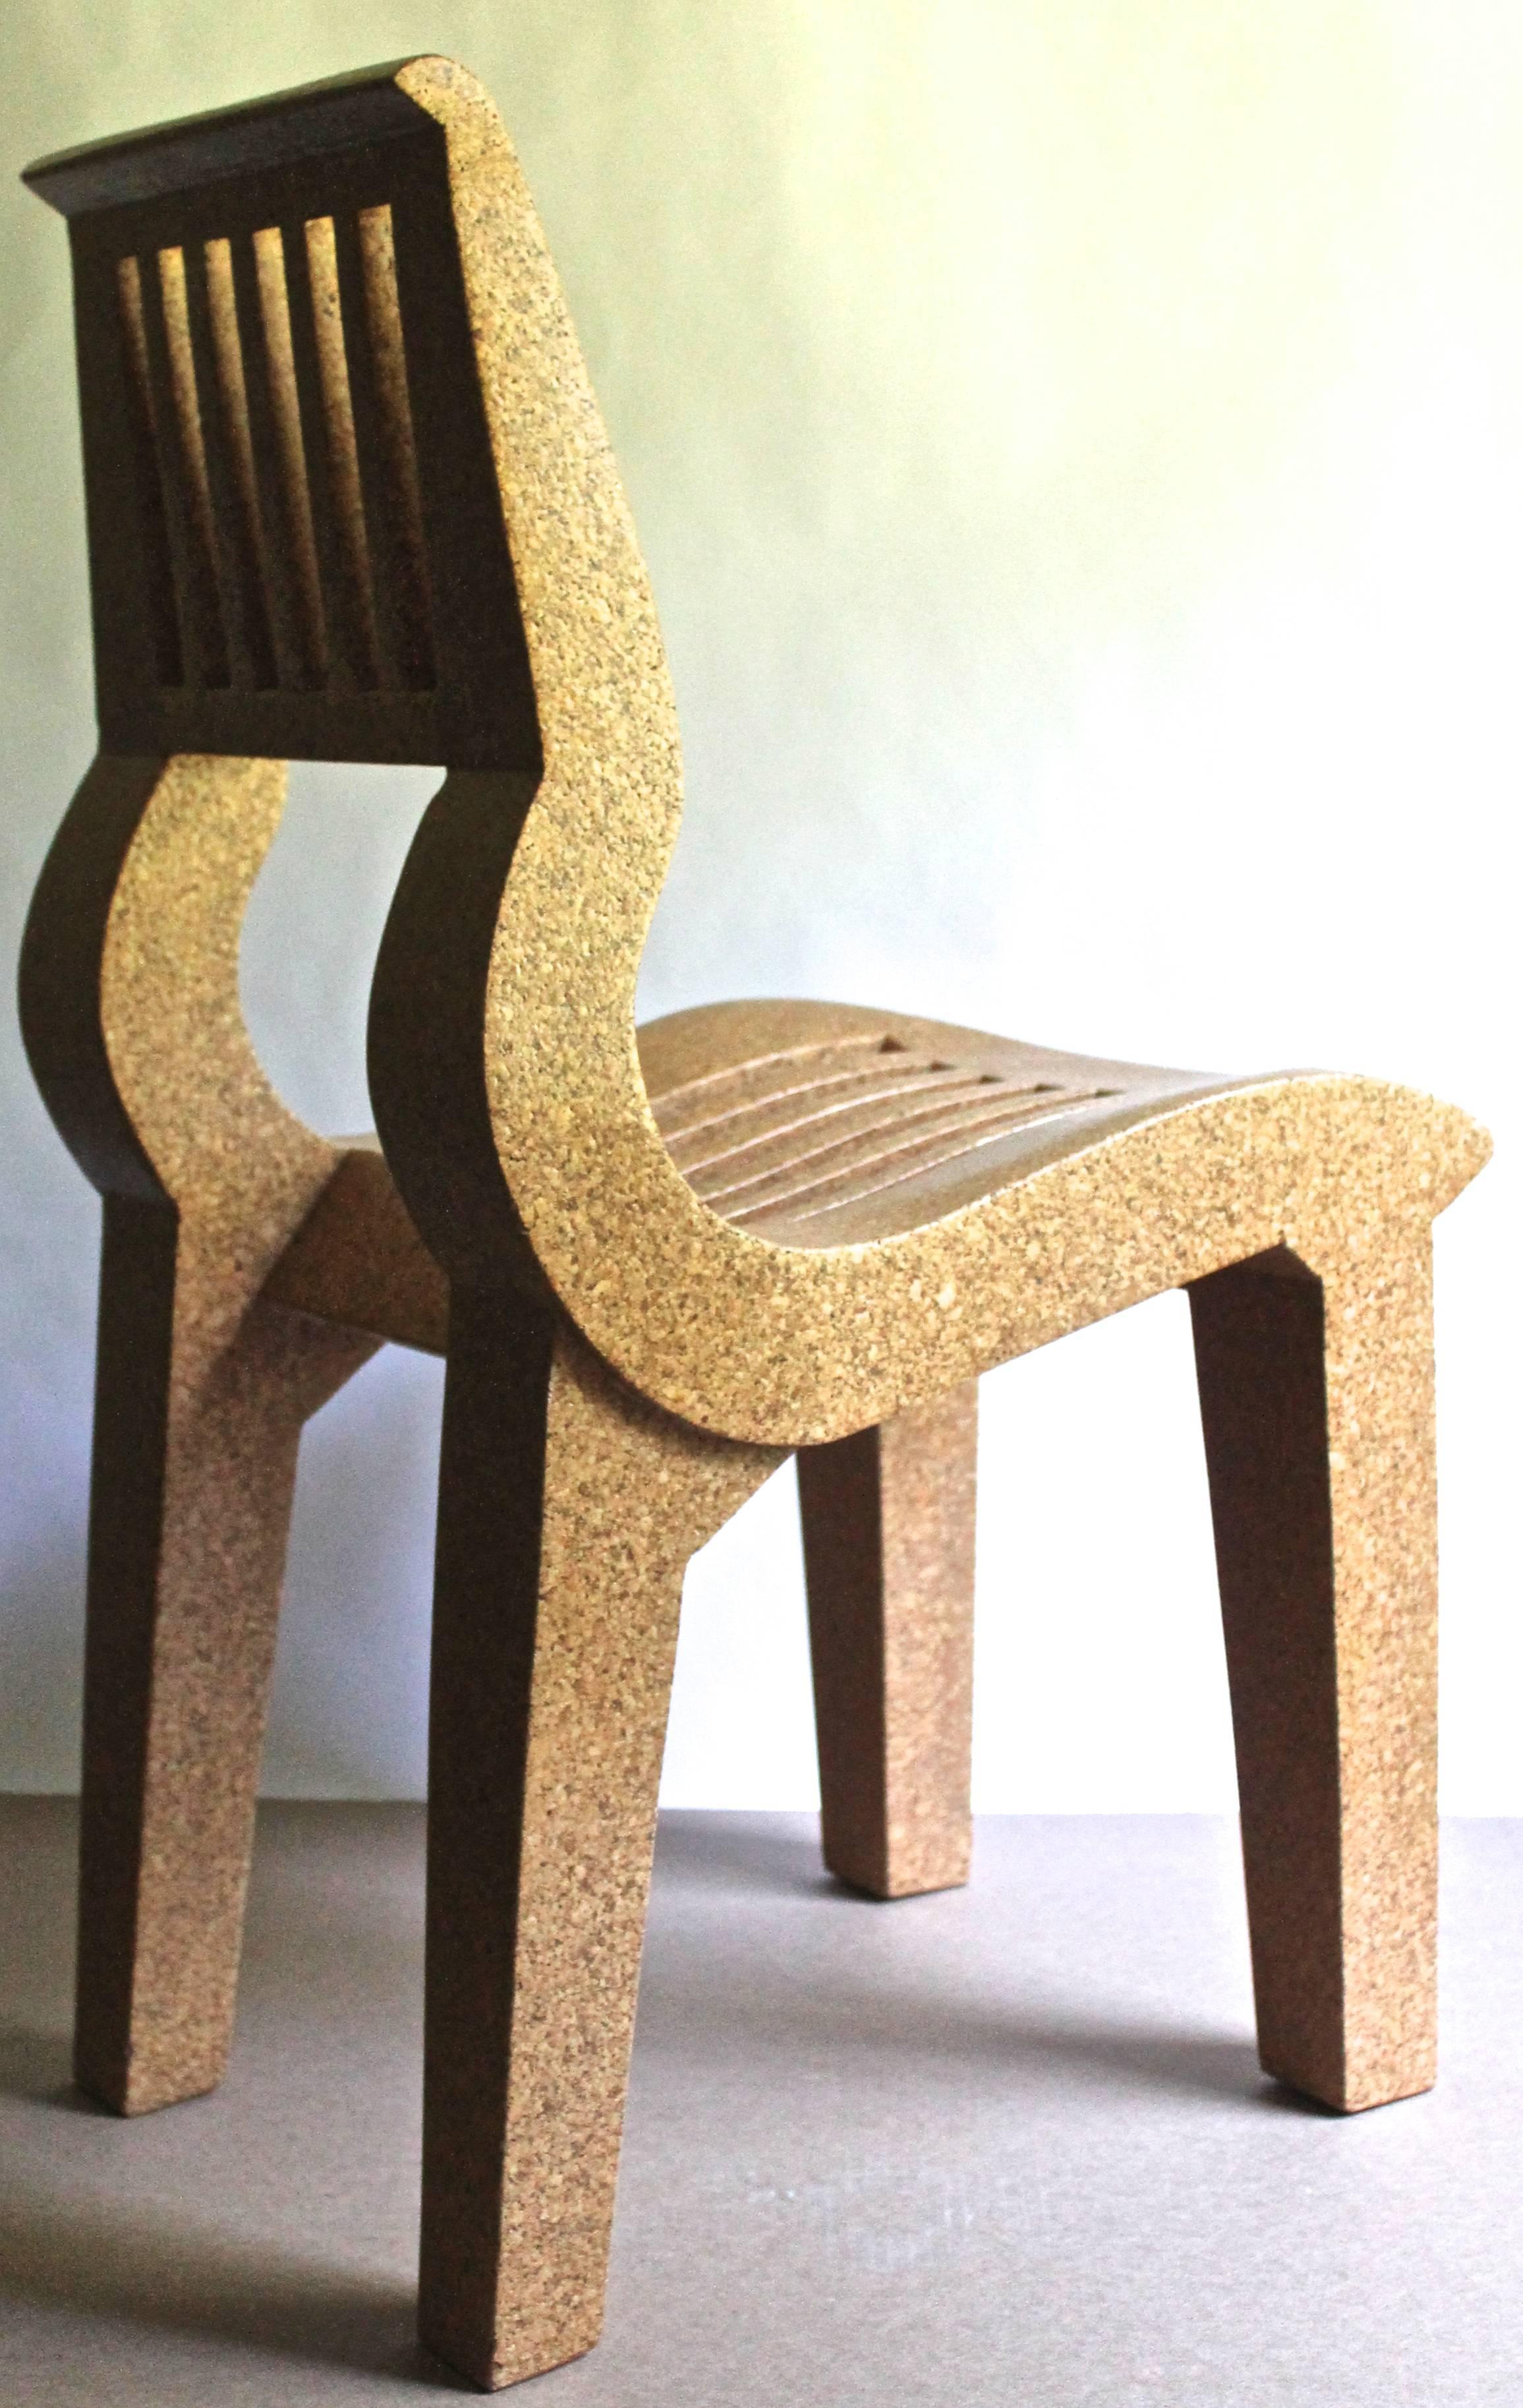 Solid cork, designed by Kebin Walz, made in Sardinia by KorQinc in 1997 distributed in a very small run by Knoll.